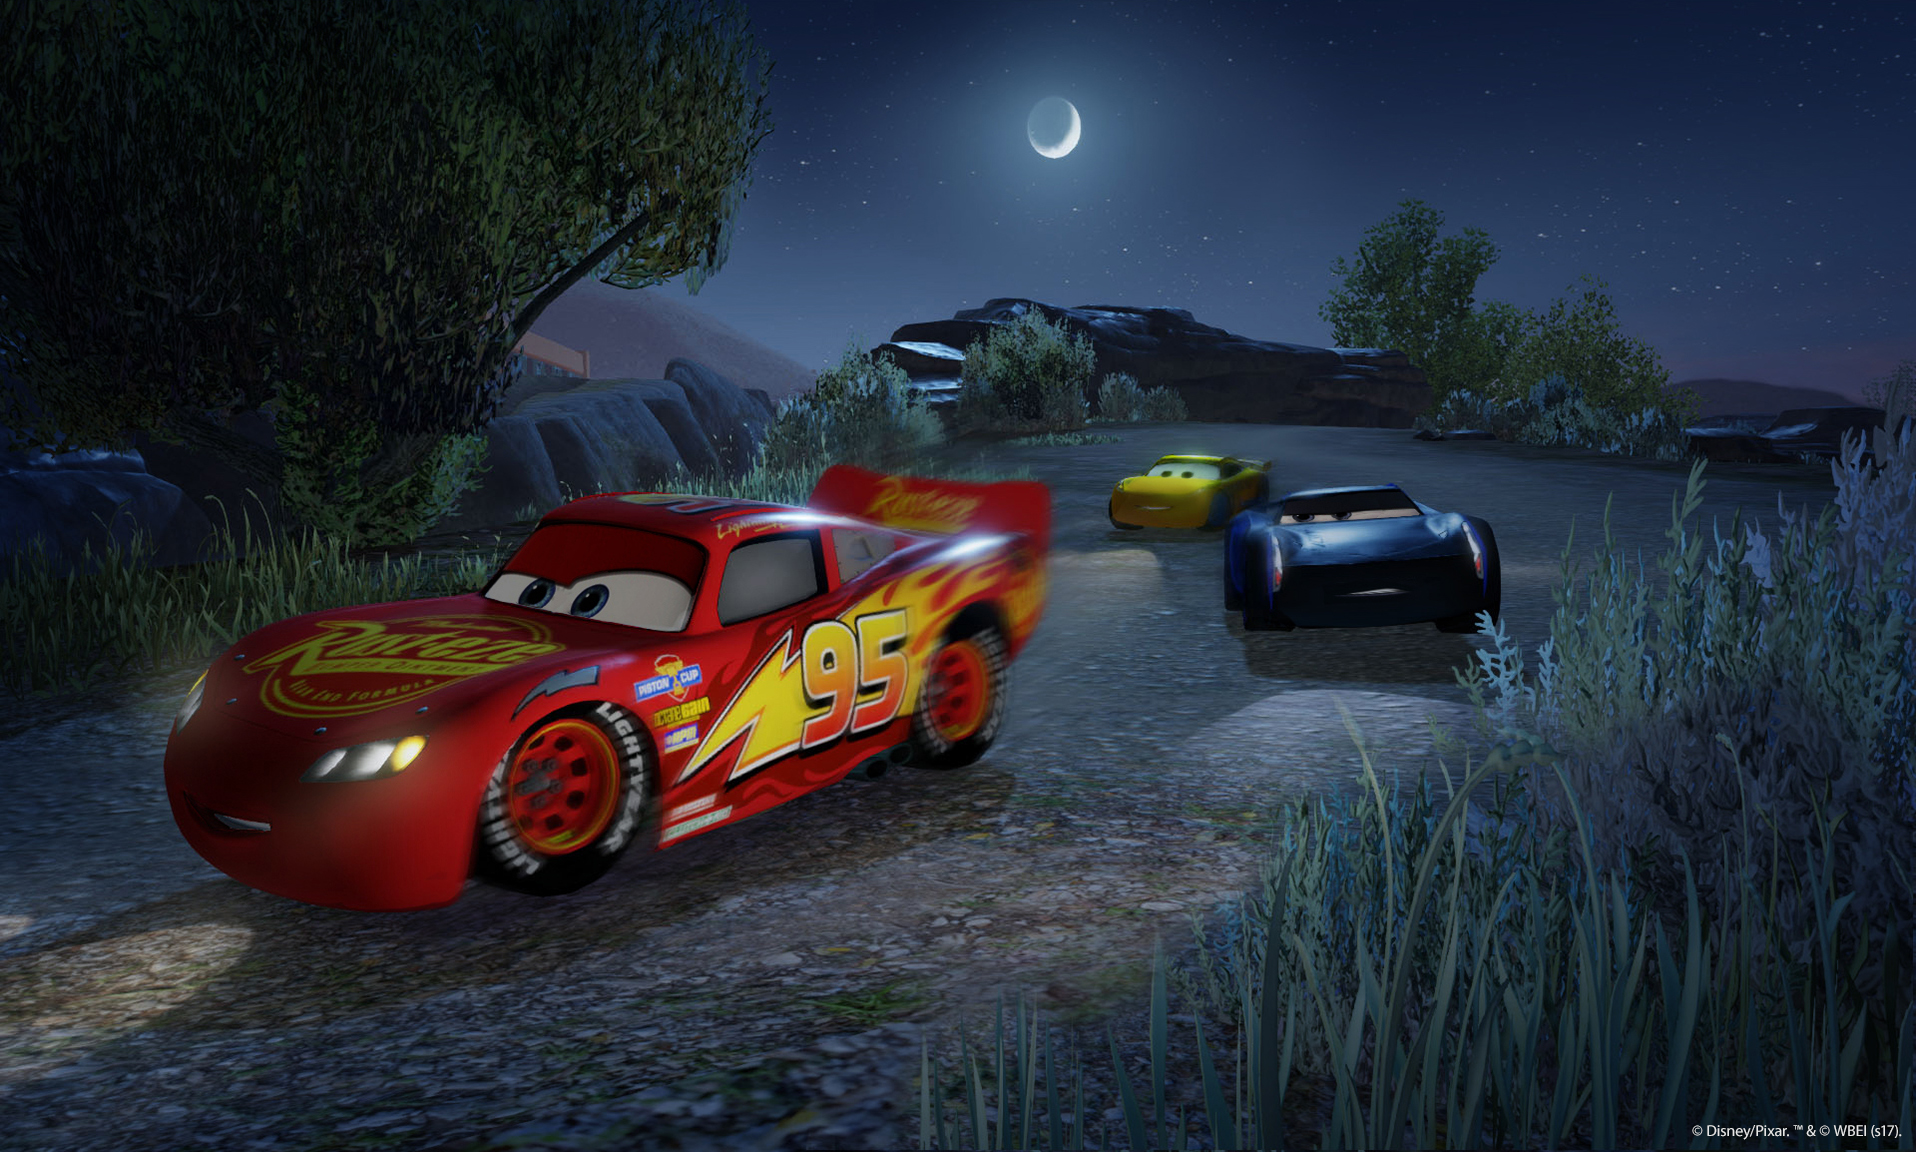 download free cars 3 driven to win reviews